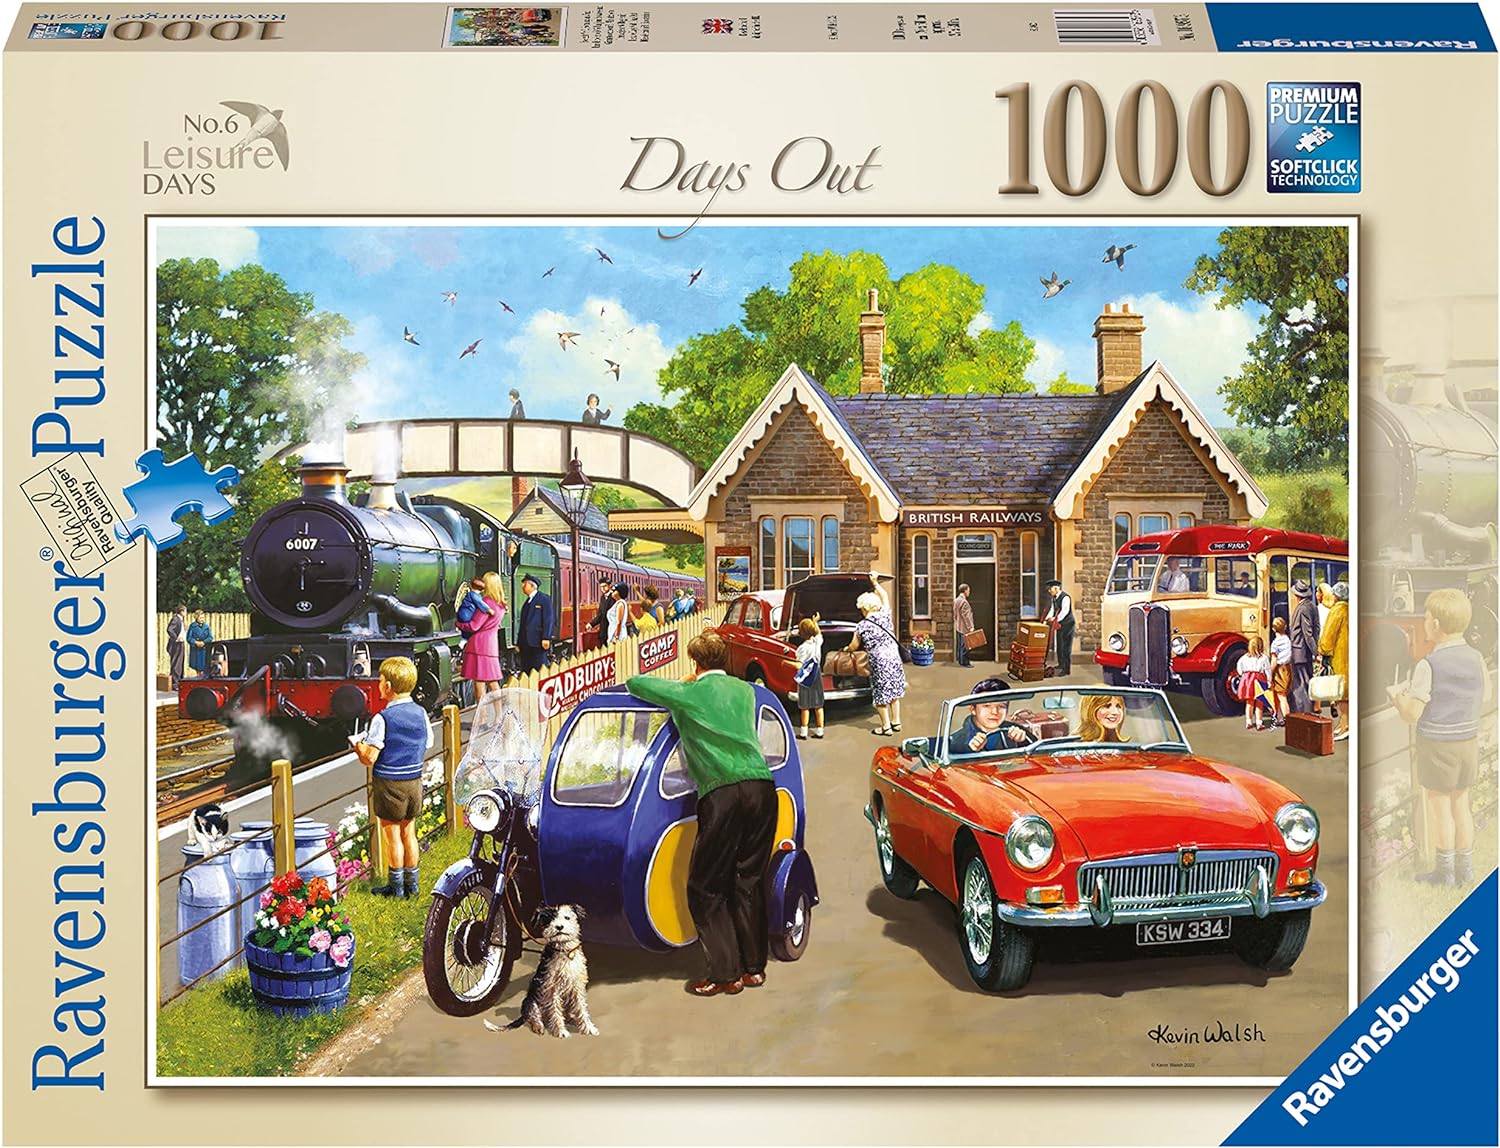 Ravensburger 1000 Piece Jigsaw Puzzle - Days Out - MGB and Motorcycle-Sidecar - 169573